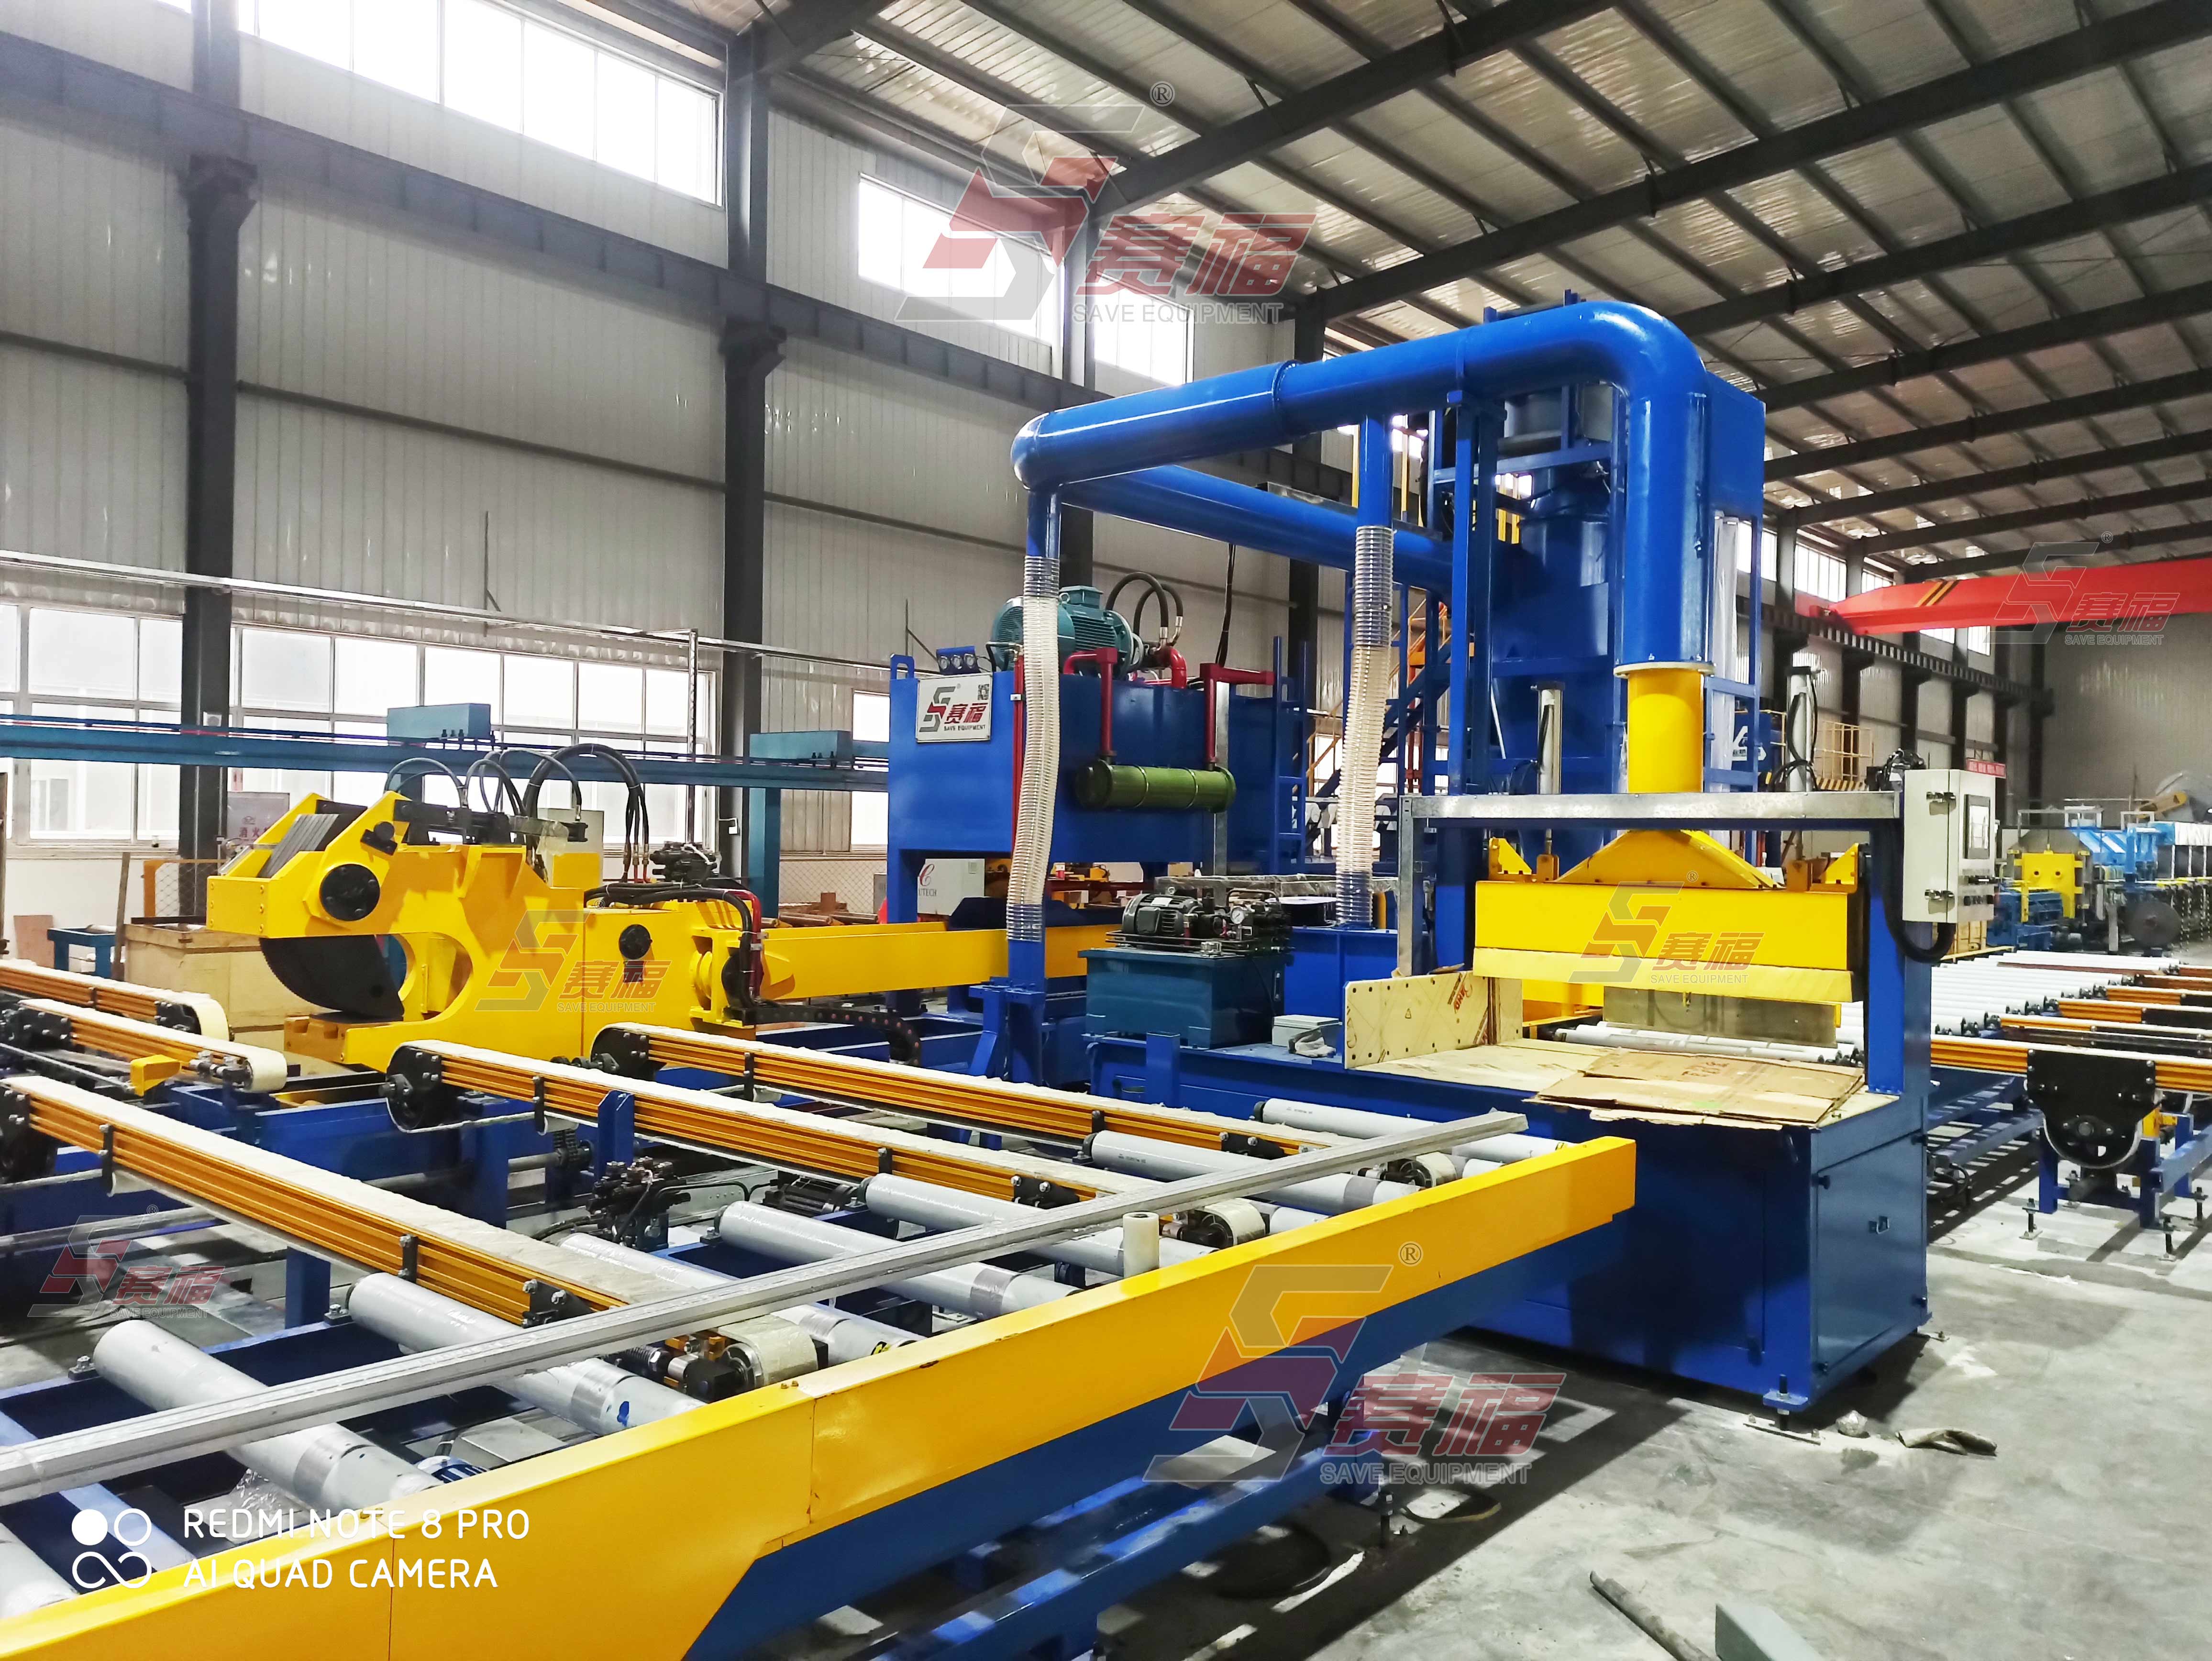 Xingfa aluminium ordered one set of quench equipment 4000-ton from us.